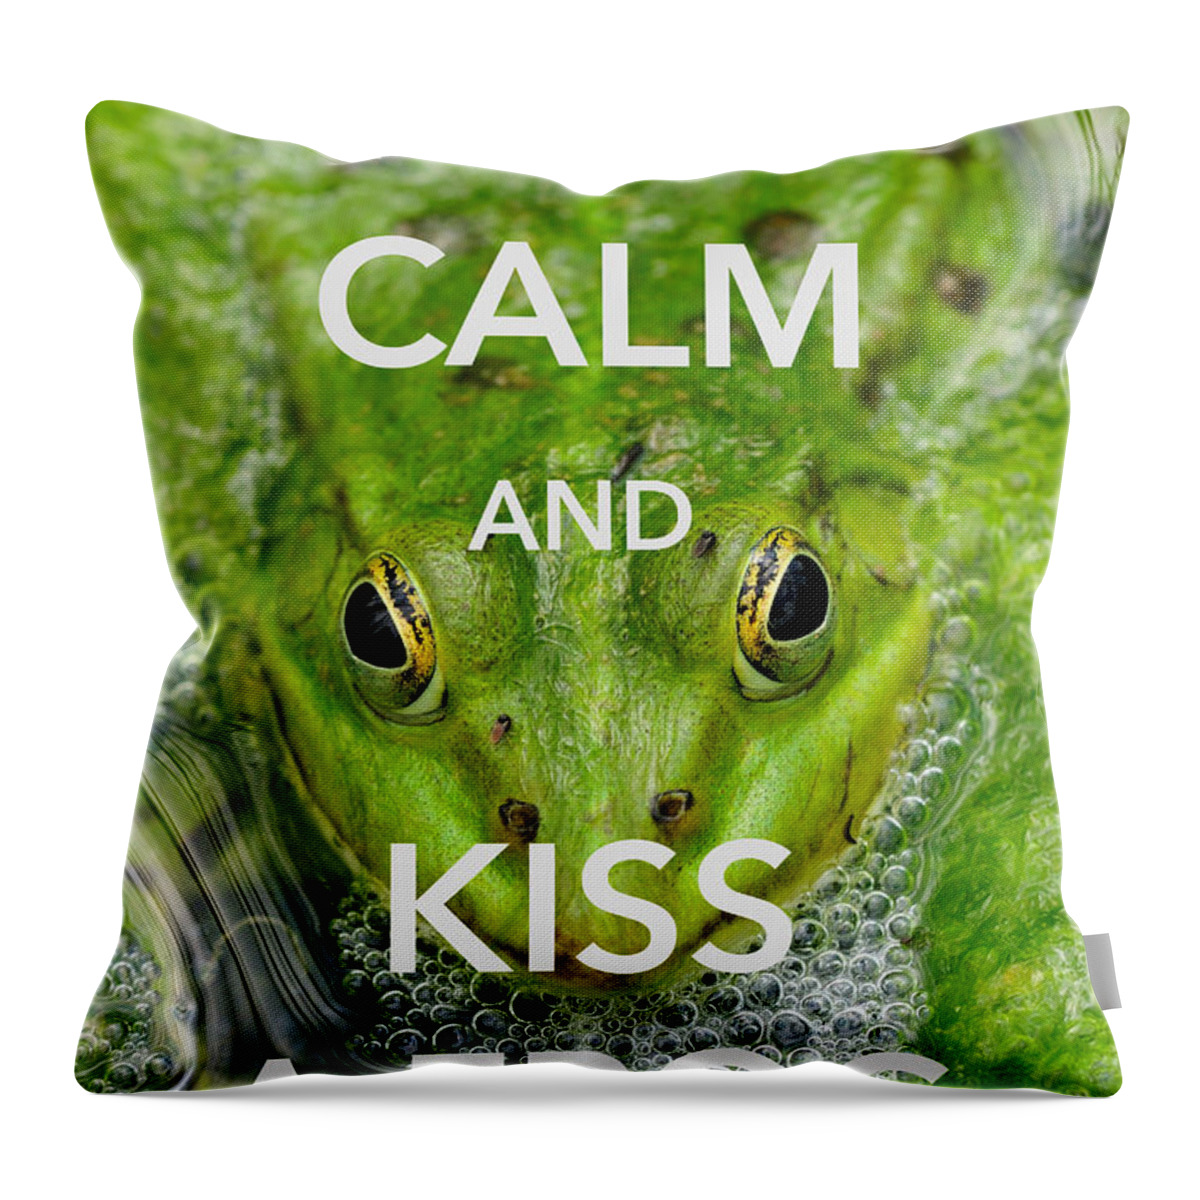 Keep Calm Throw Pillow featuring the photograph Keep calm and kiss a frog funny quote by Matthias Hauser